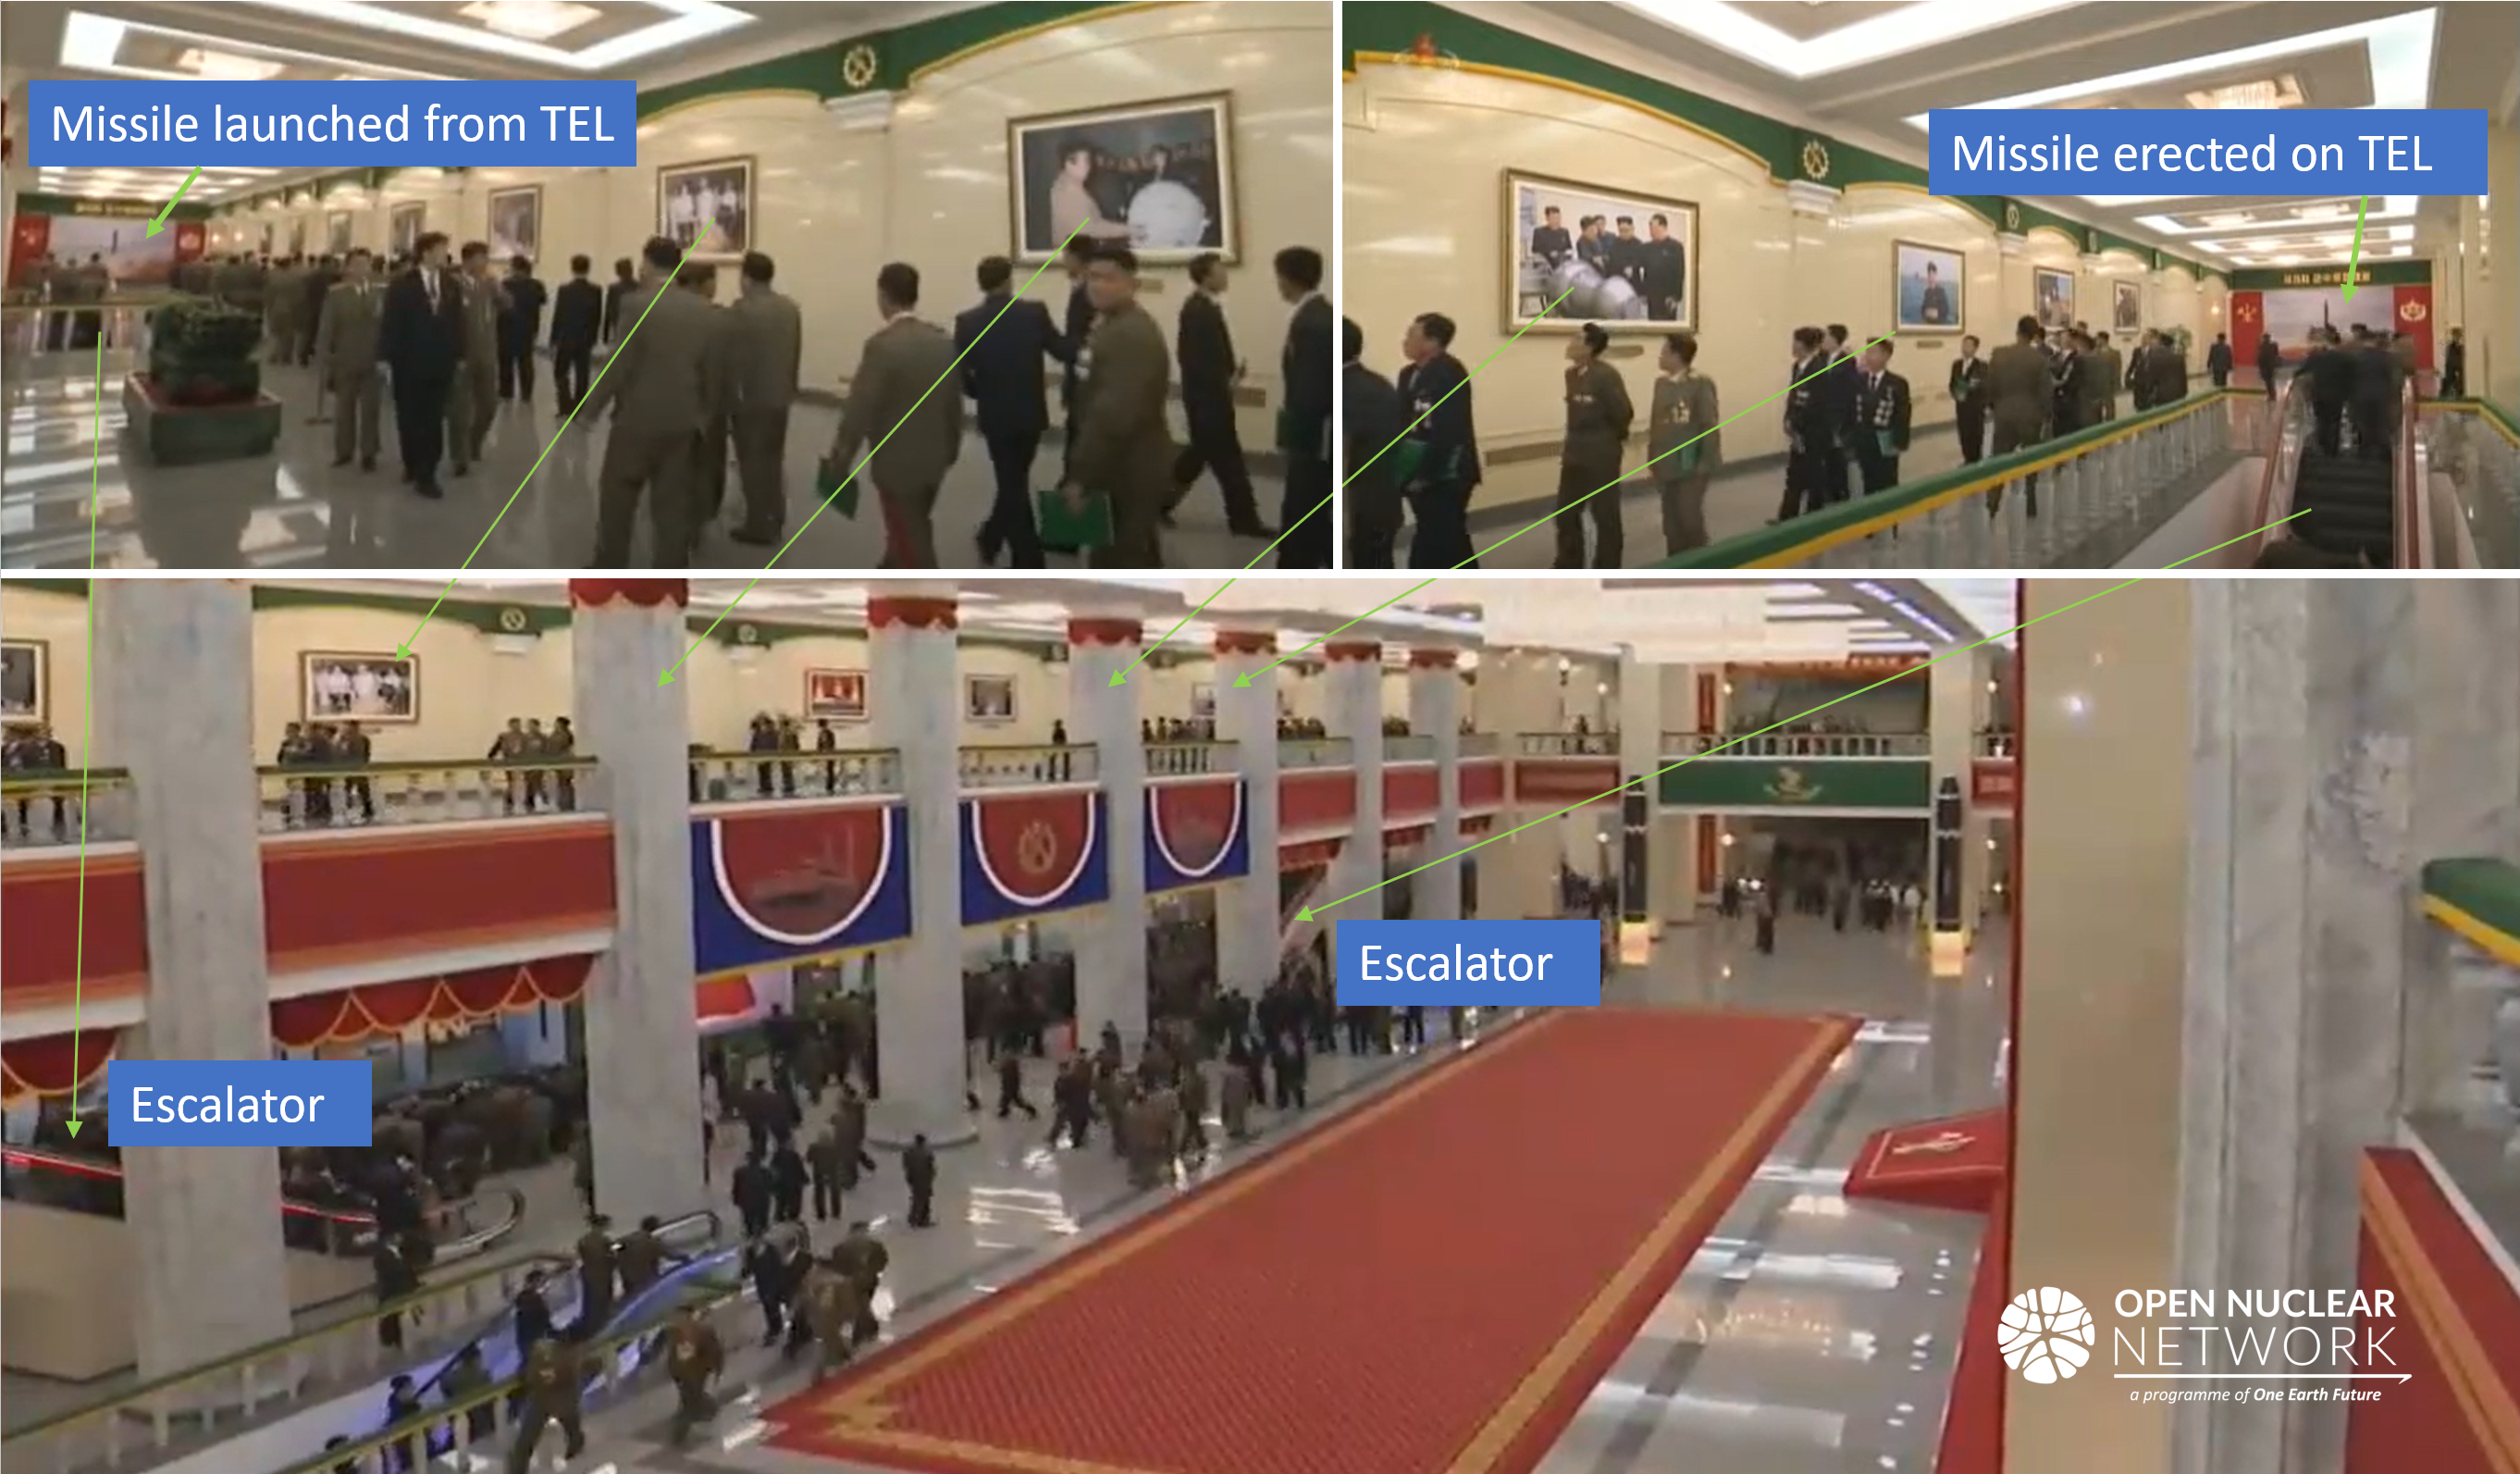 Figure 2. Kim Jong Il inspecting a spherical object — possibly two pictures away from the one of Kim Jong Un inspecting a purported two-stage thermonuclear device. Images: KCTV